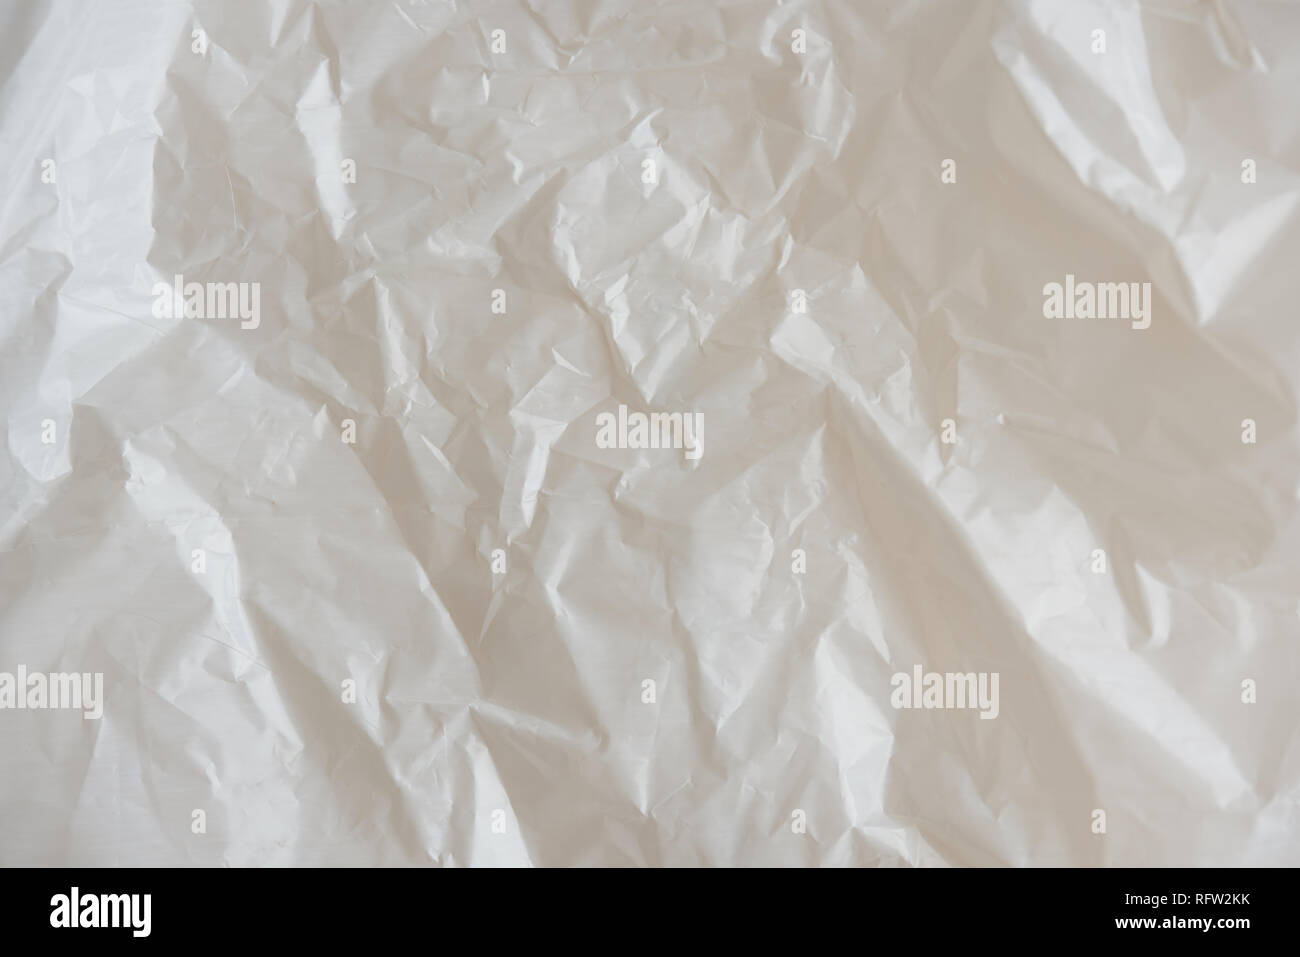 Crumpled white plastic texture close up view Stock Photo